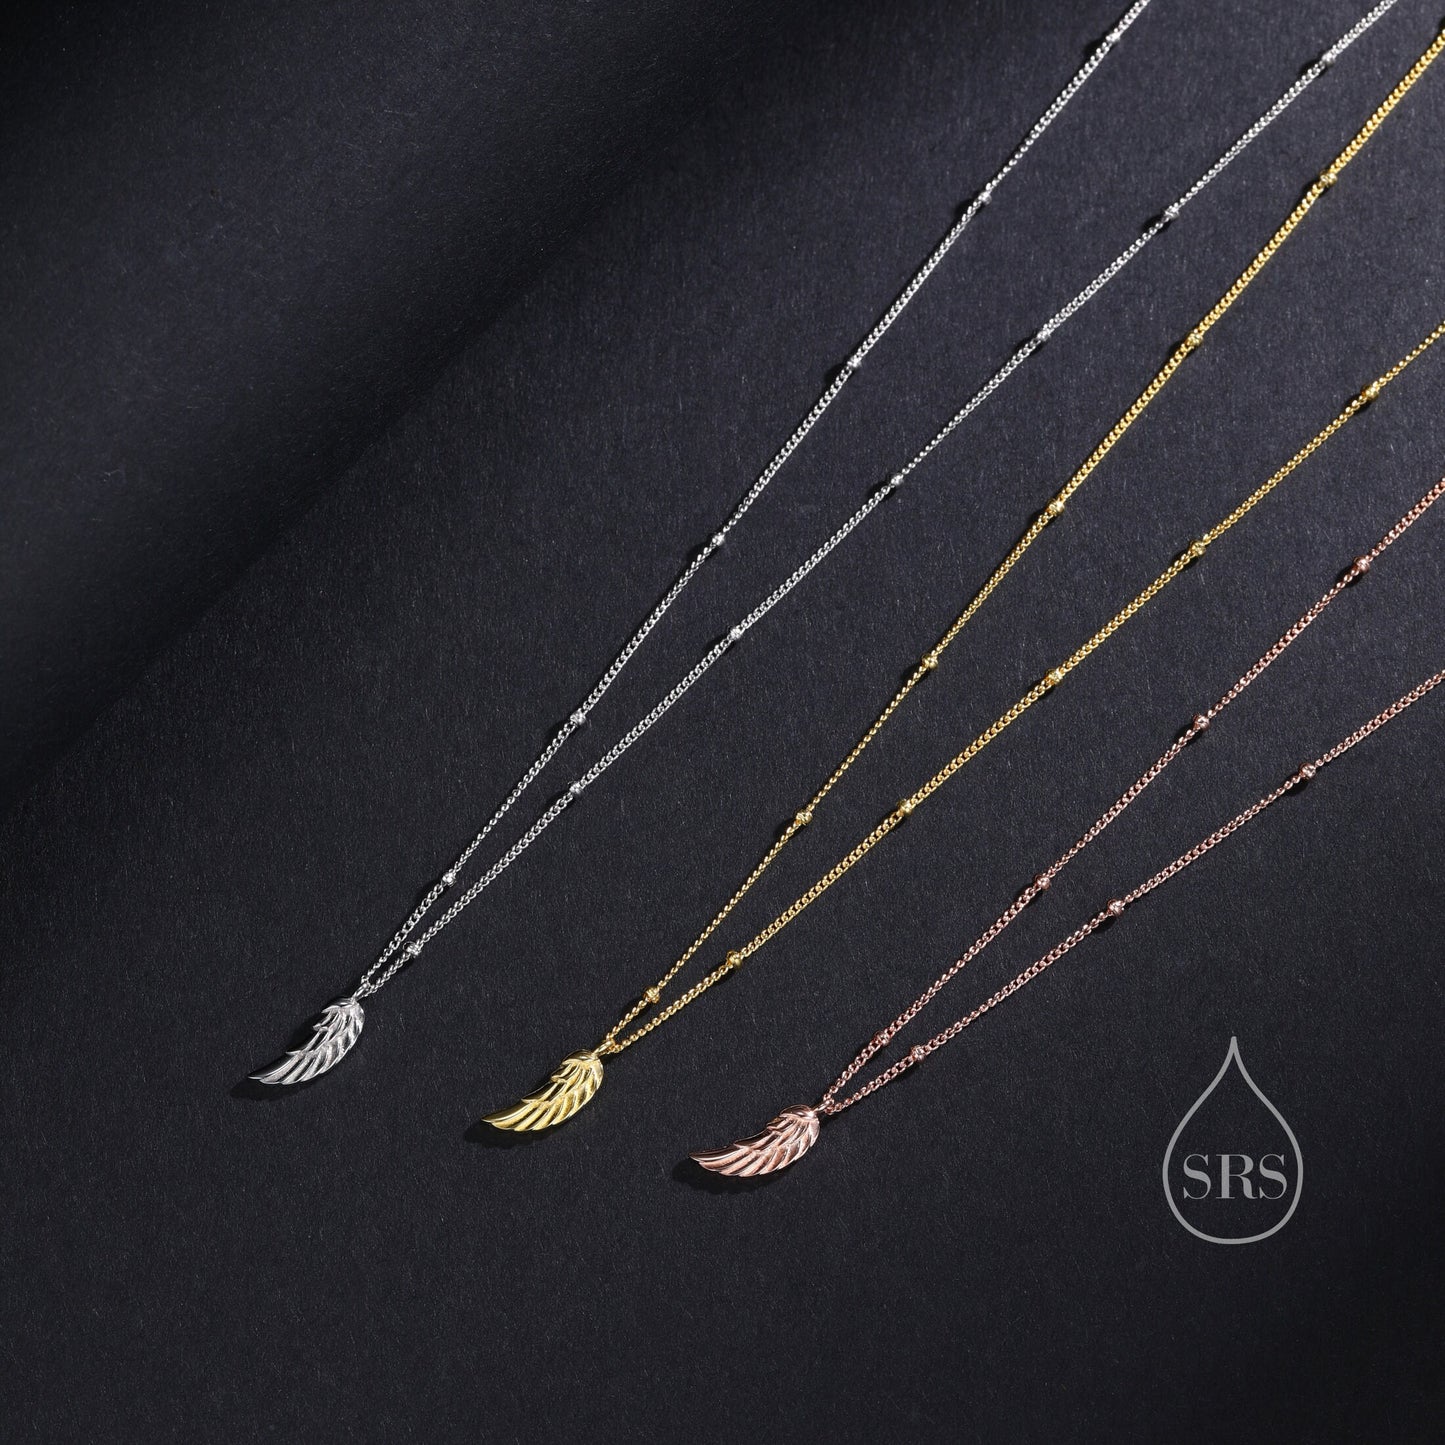 Tiny and Delicate Angel Wing Pendant Necklace in Sterling Silver with a Satellite Chain, Bird Necklace, Silver or Gold or Rose Gold